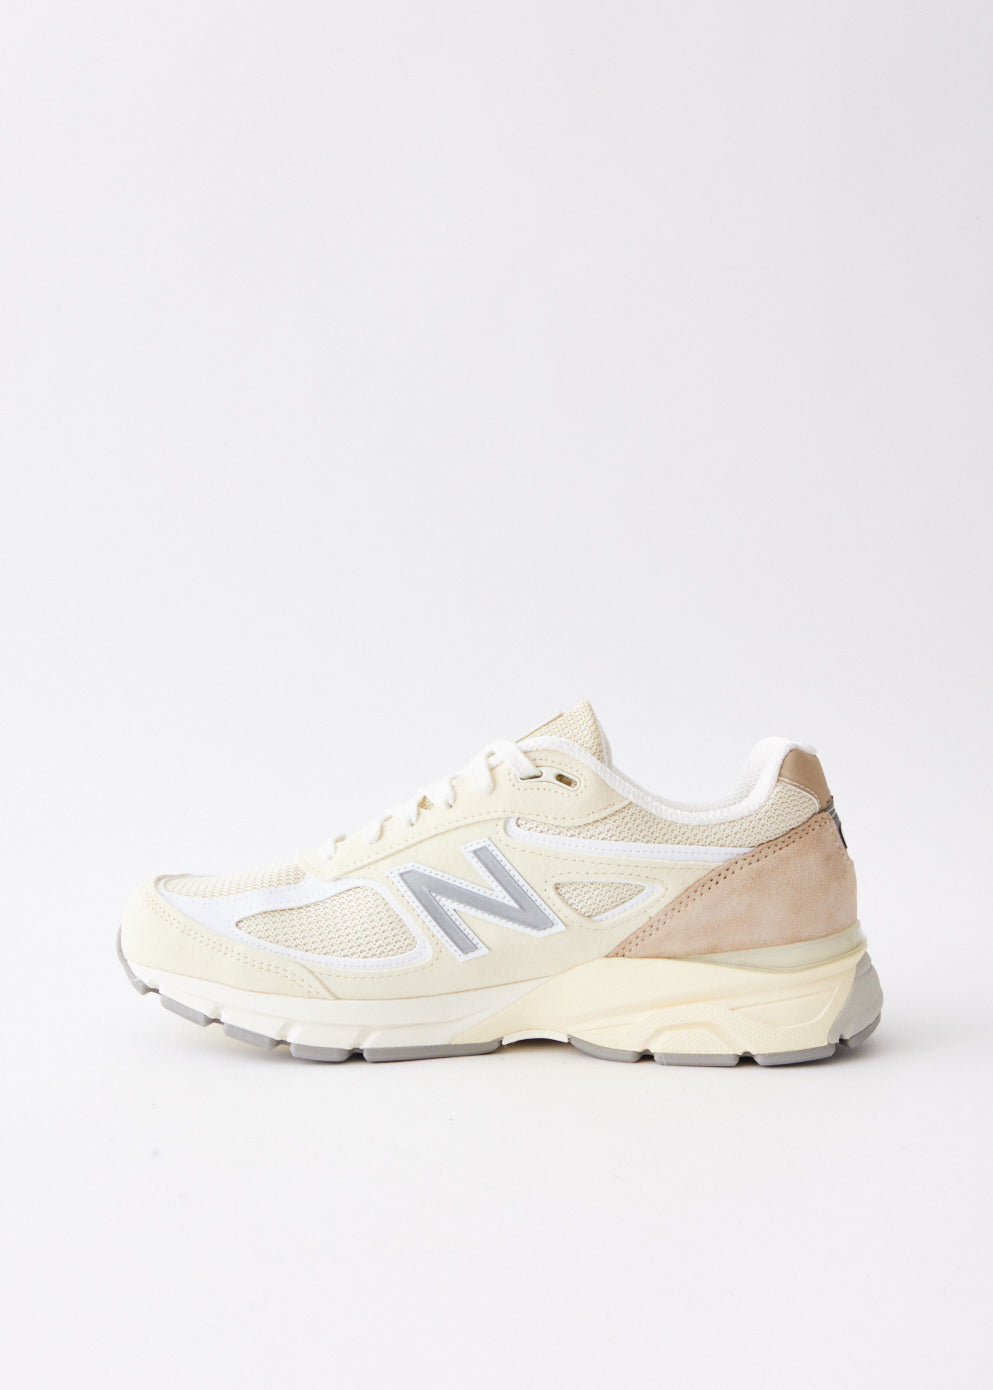 MADE in USA 990v4 'Limestone' Sneakers